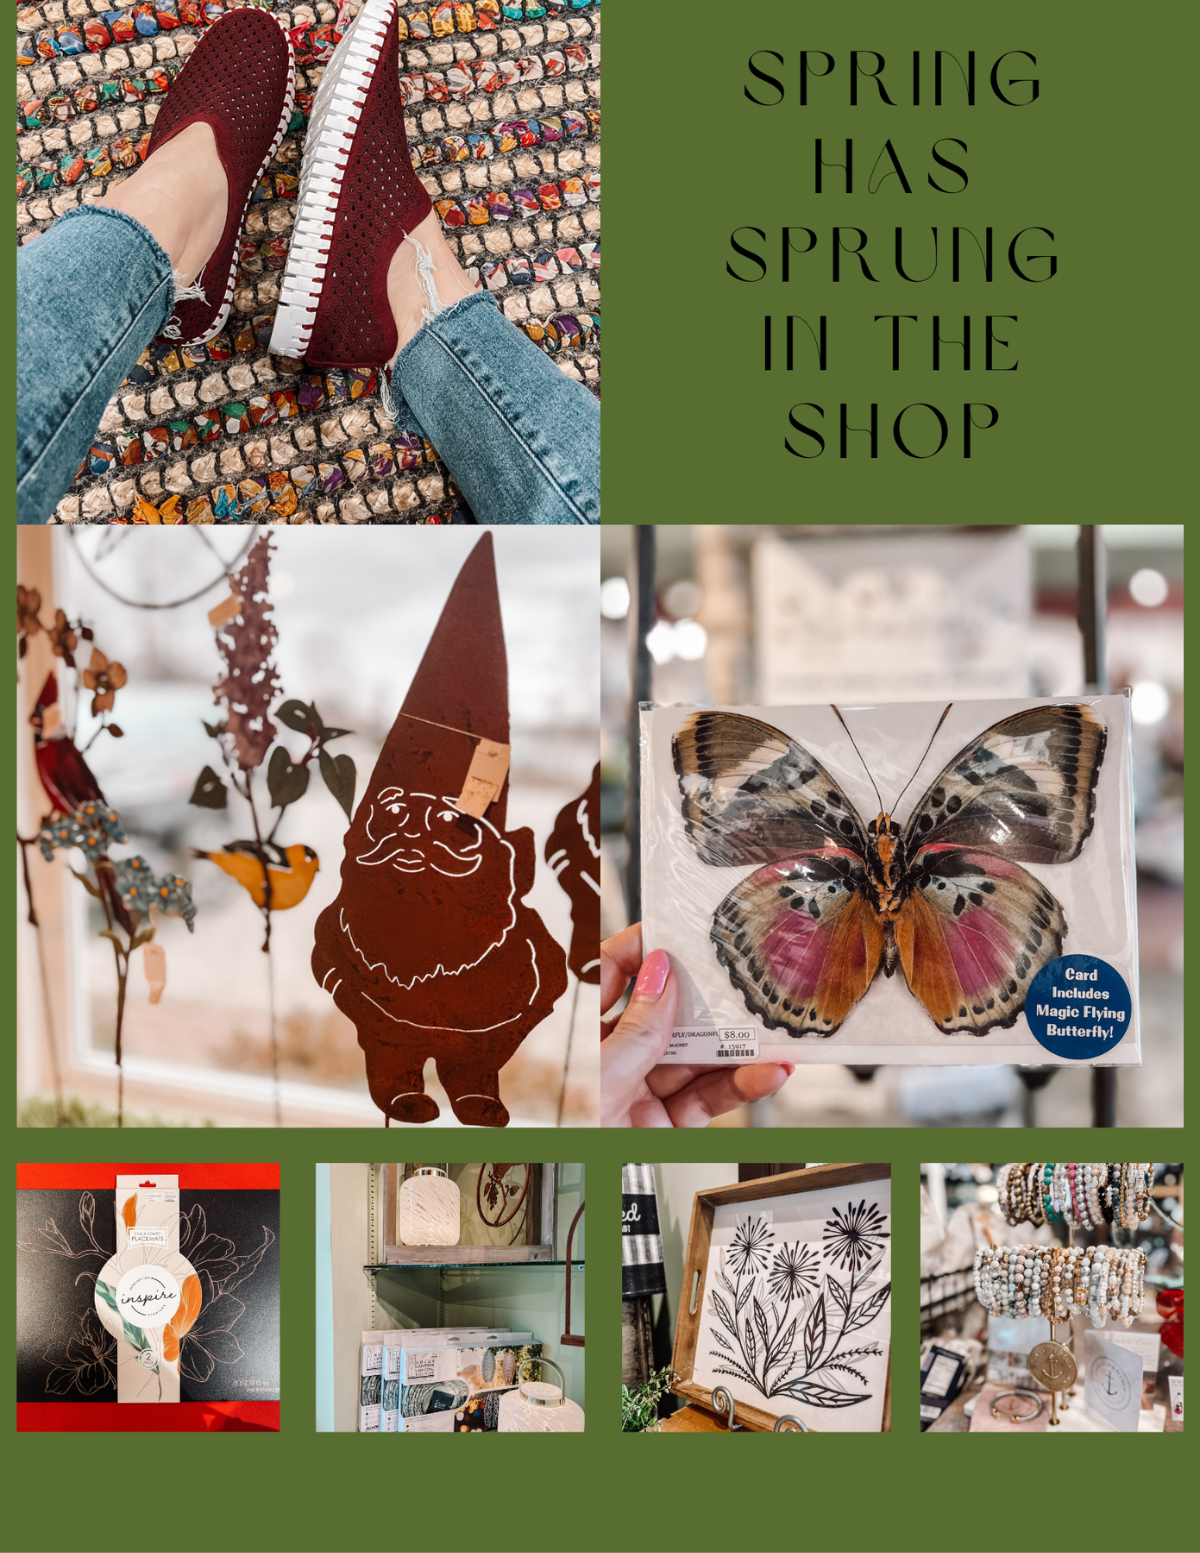 Spring has sprung in the shop! Come see the new Spring arrivals at Willow